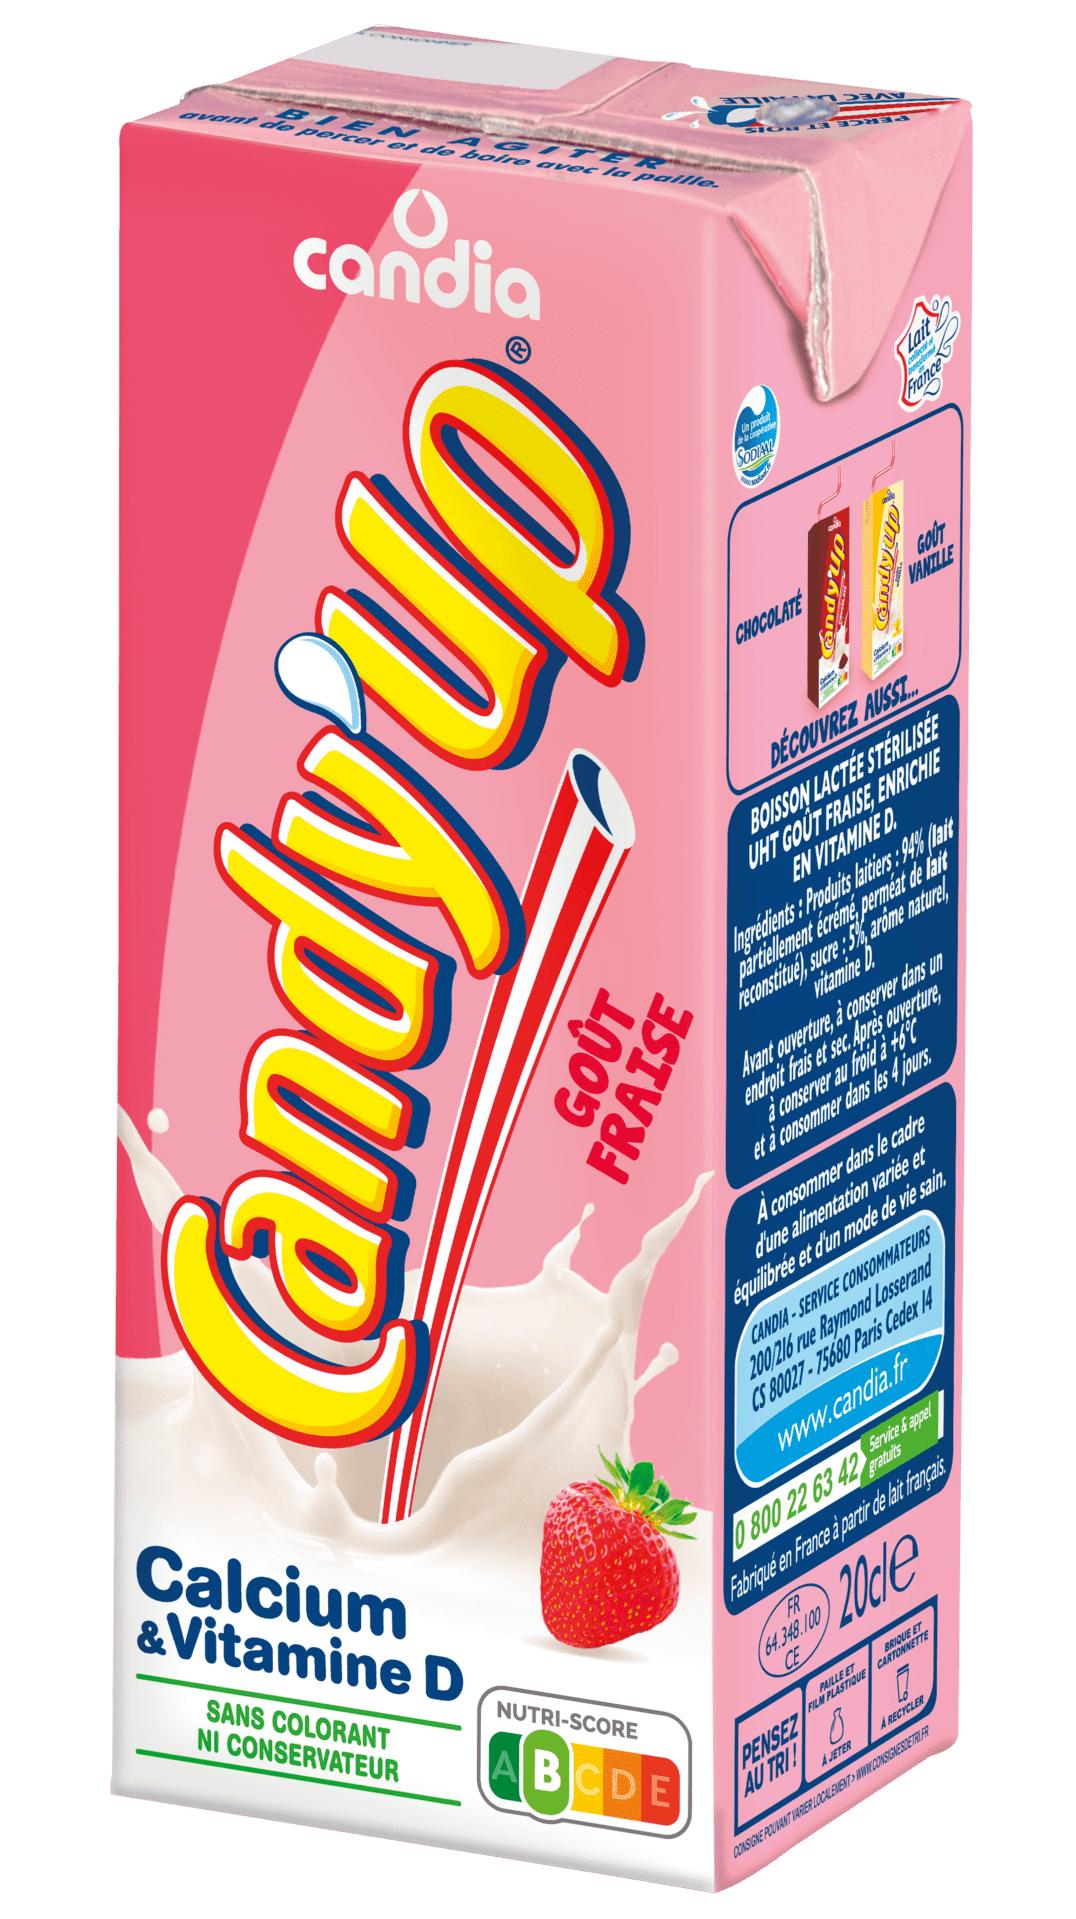 Candy'up — Candia